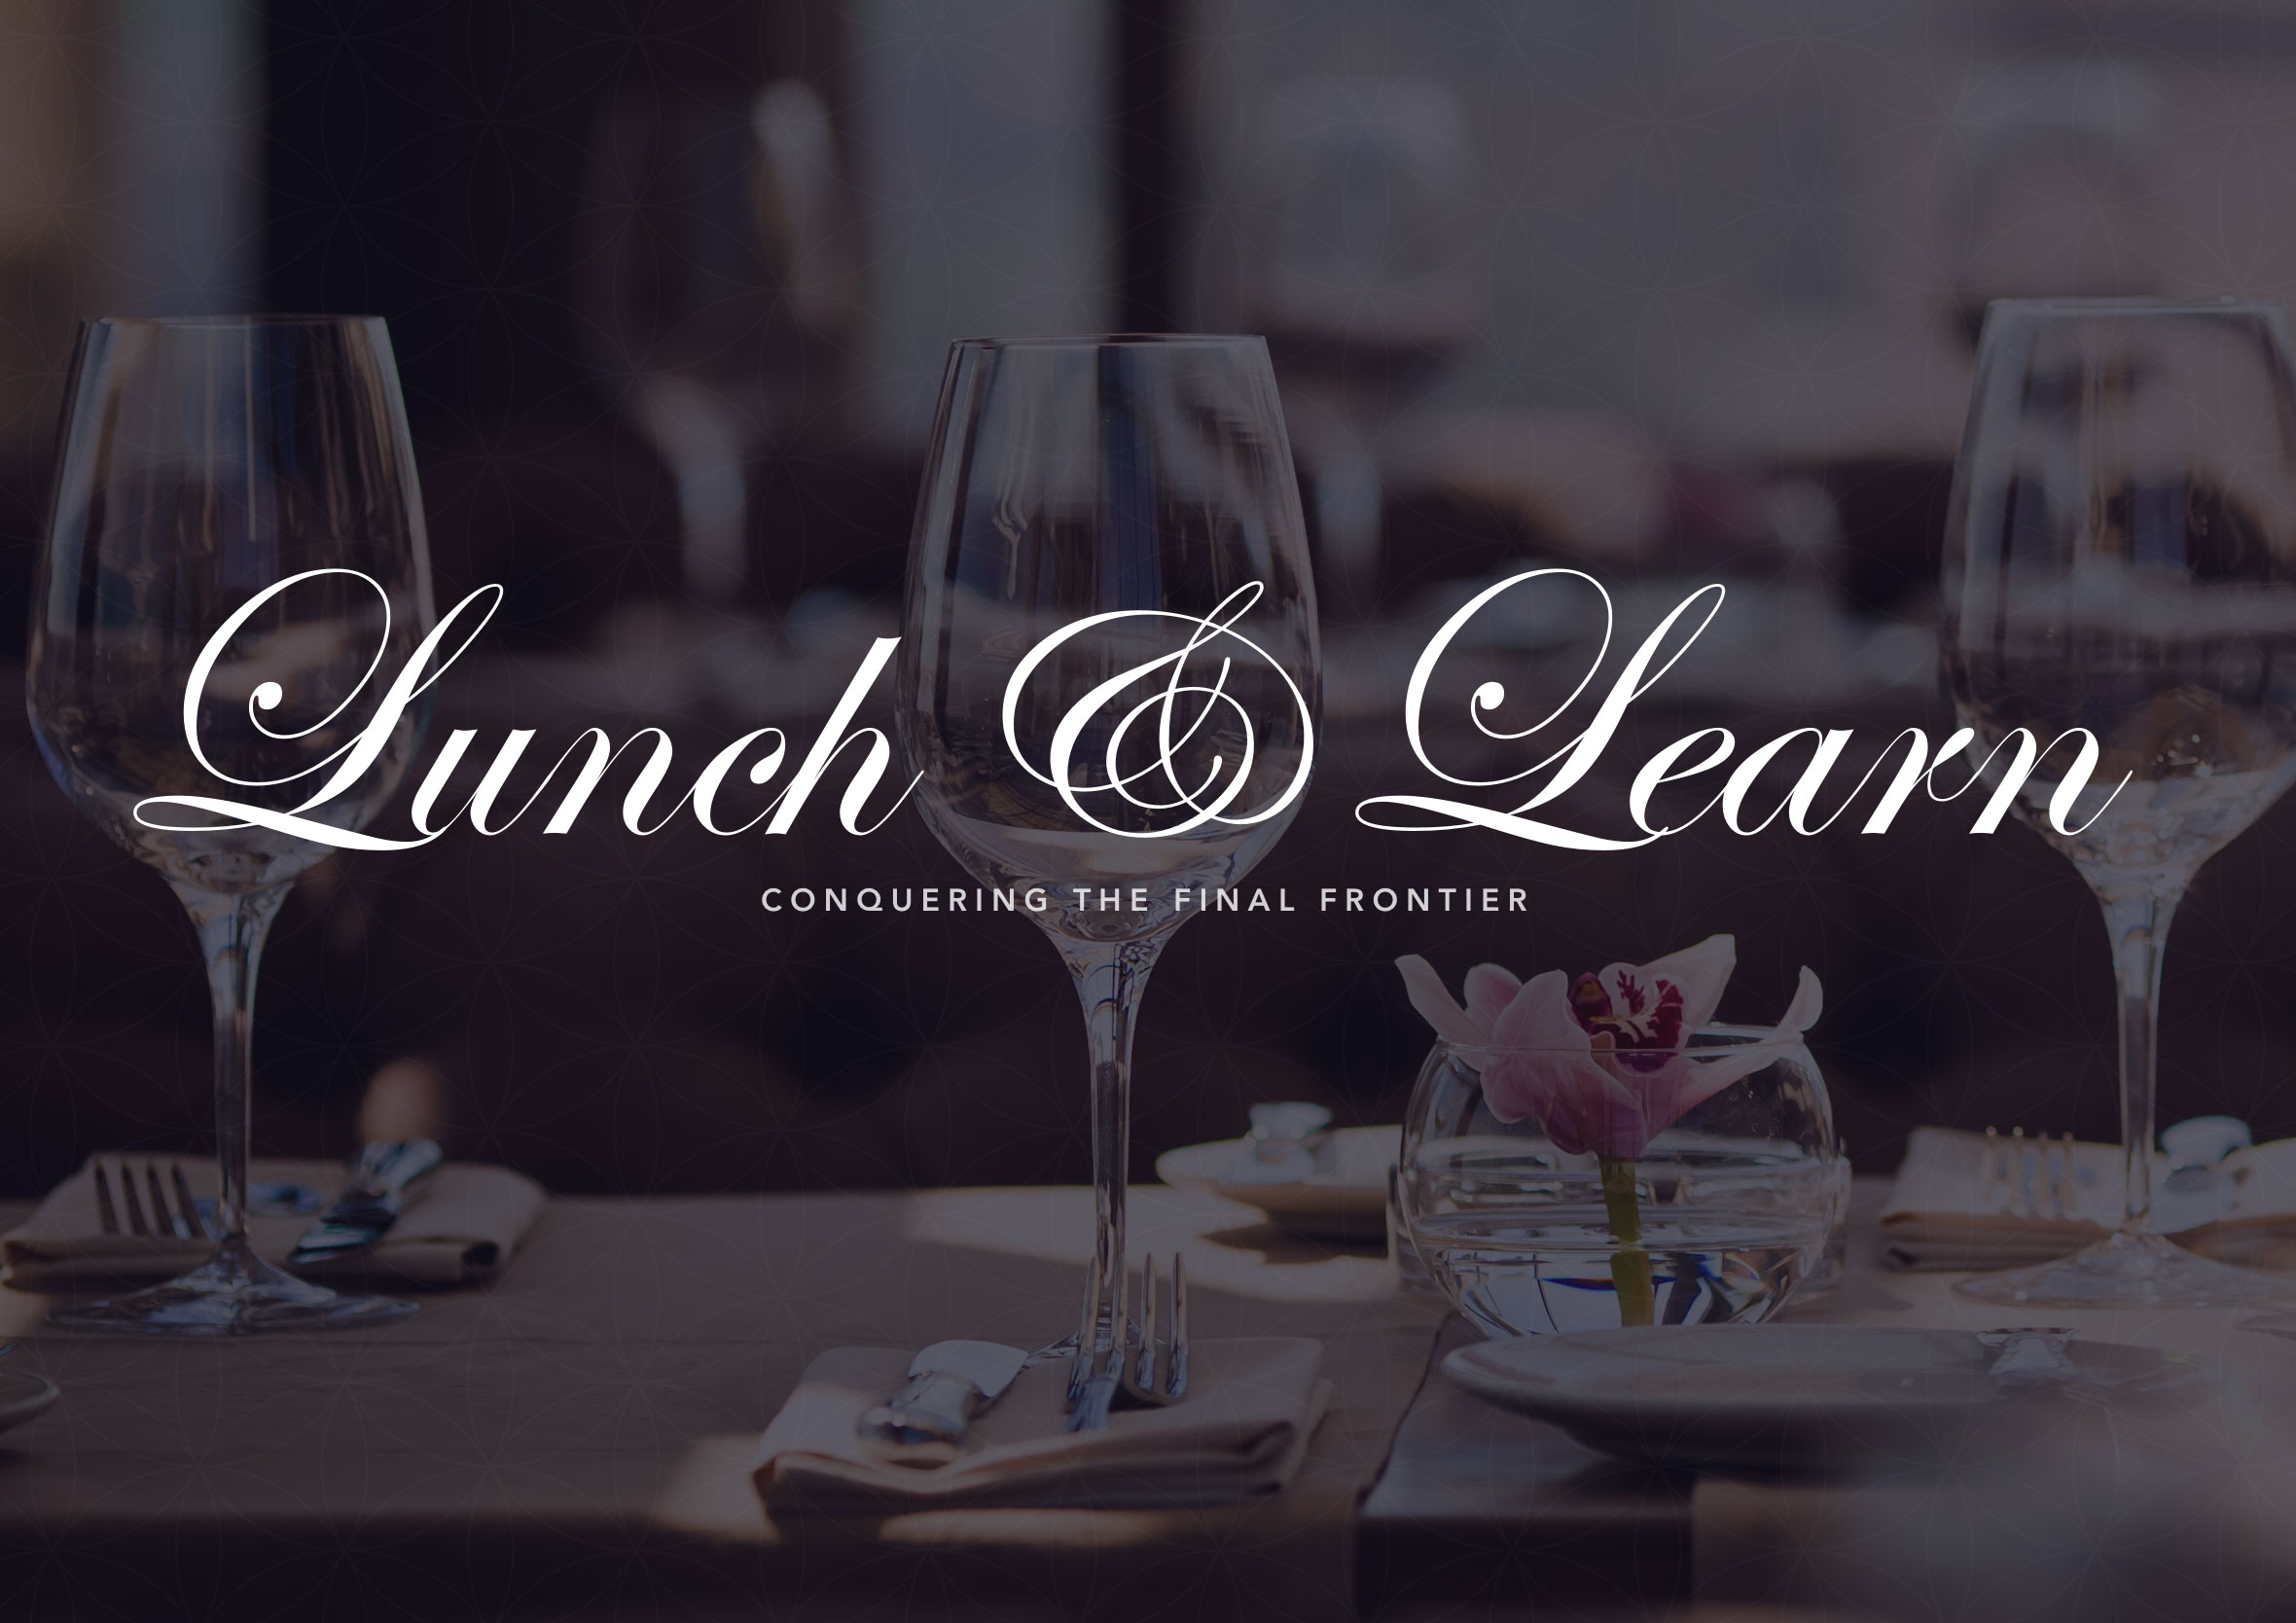 CDP executive lunch invitation lunch and learn